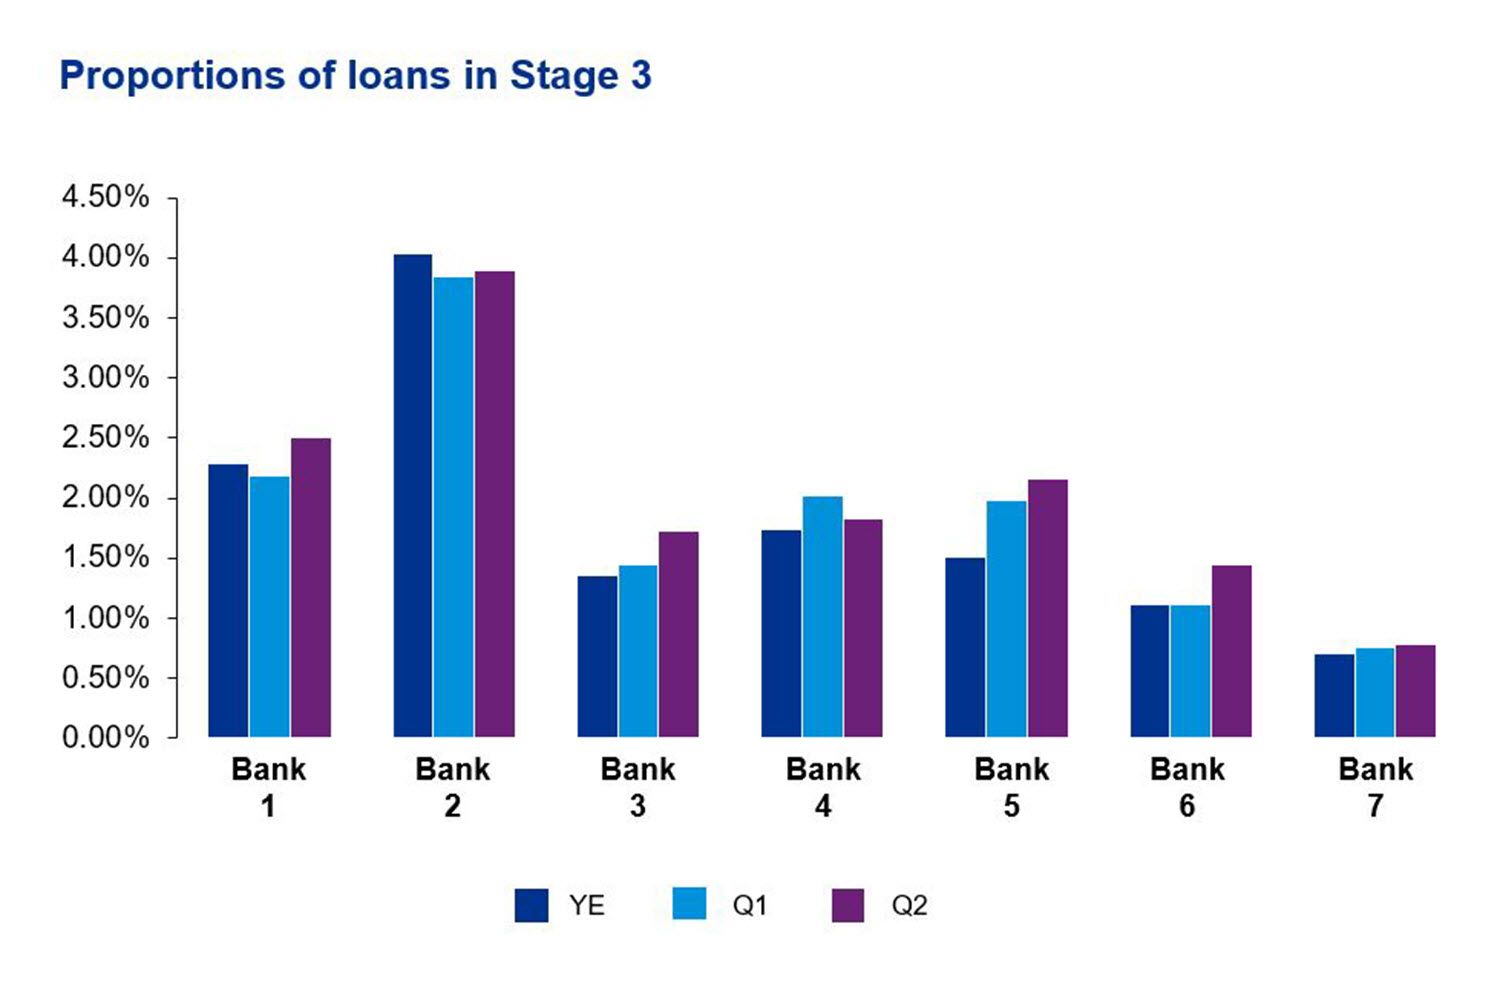 Proportions of loans in stage 3